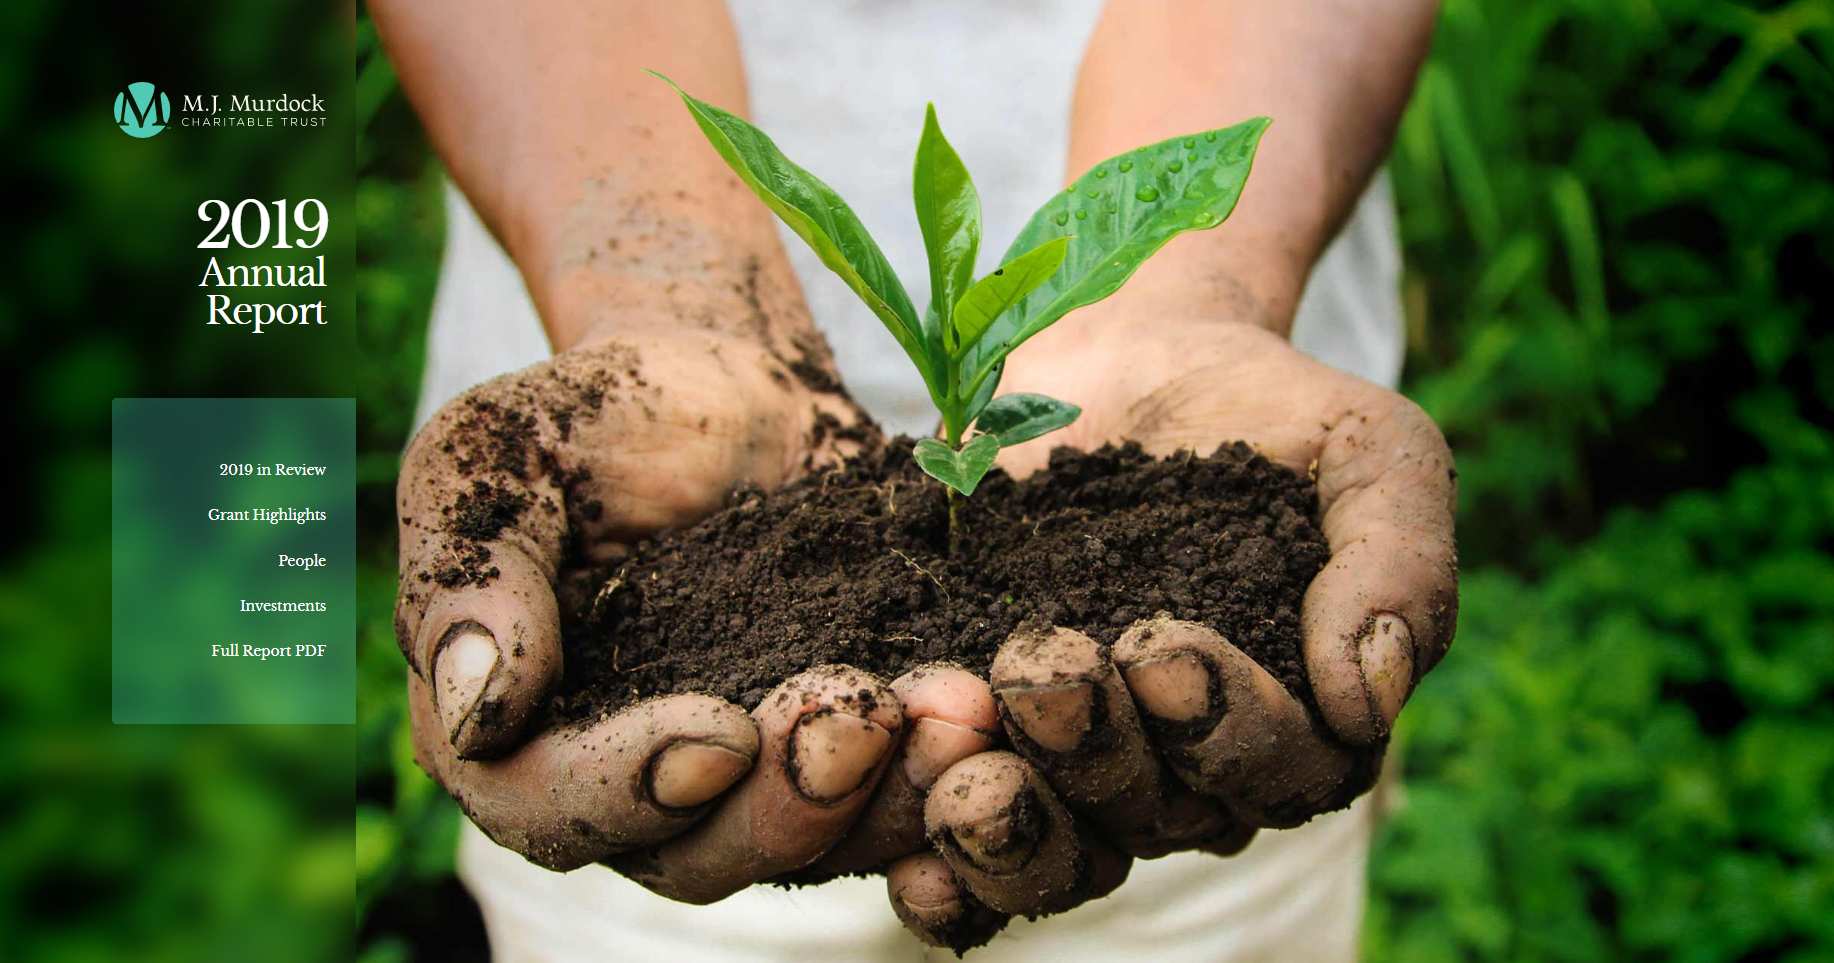 Close-up of two hands holding soil with a plant growing out of it. Text overlay that says "2019 Annual Report"